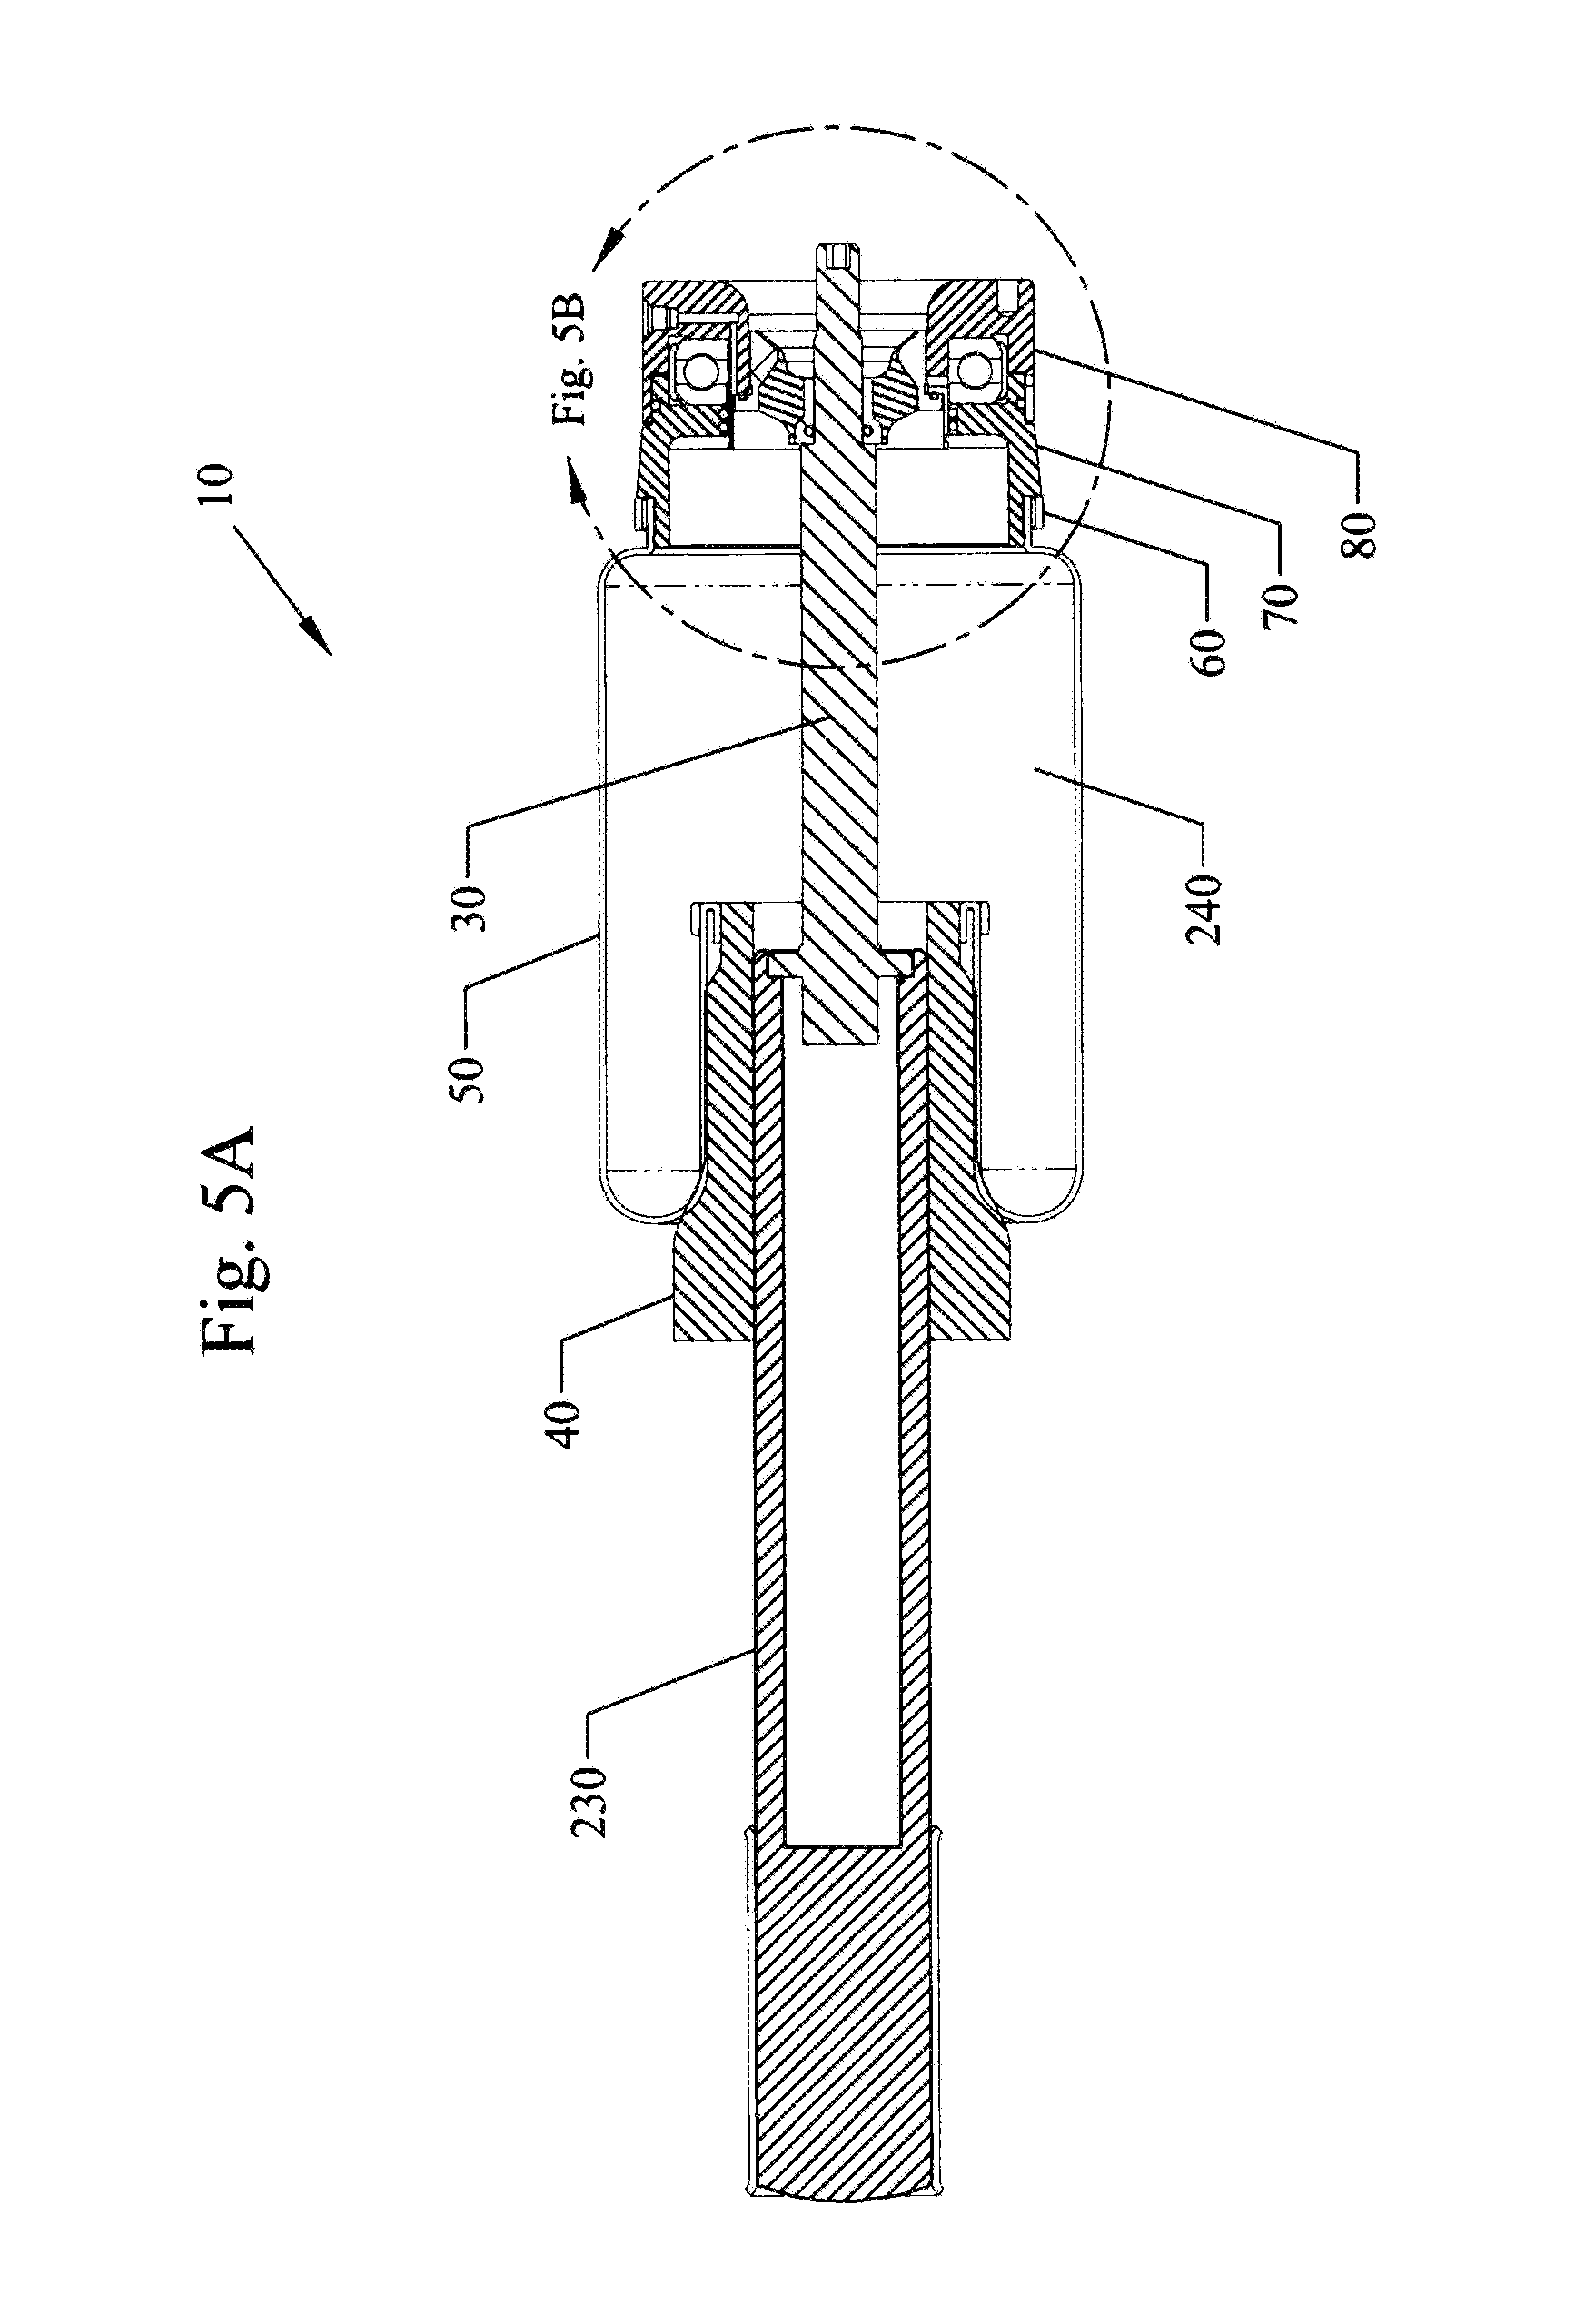 Mount and bearing for shock absorber